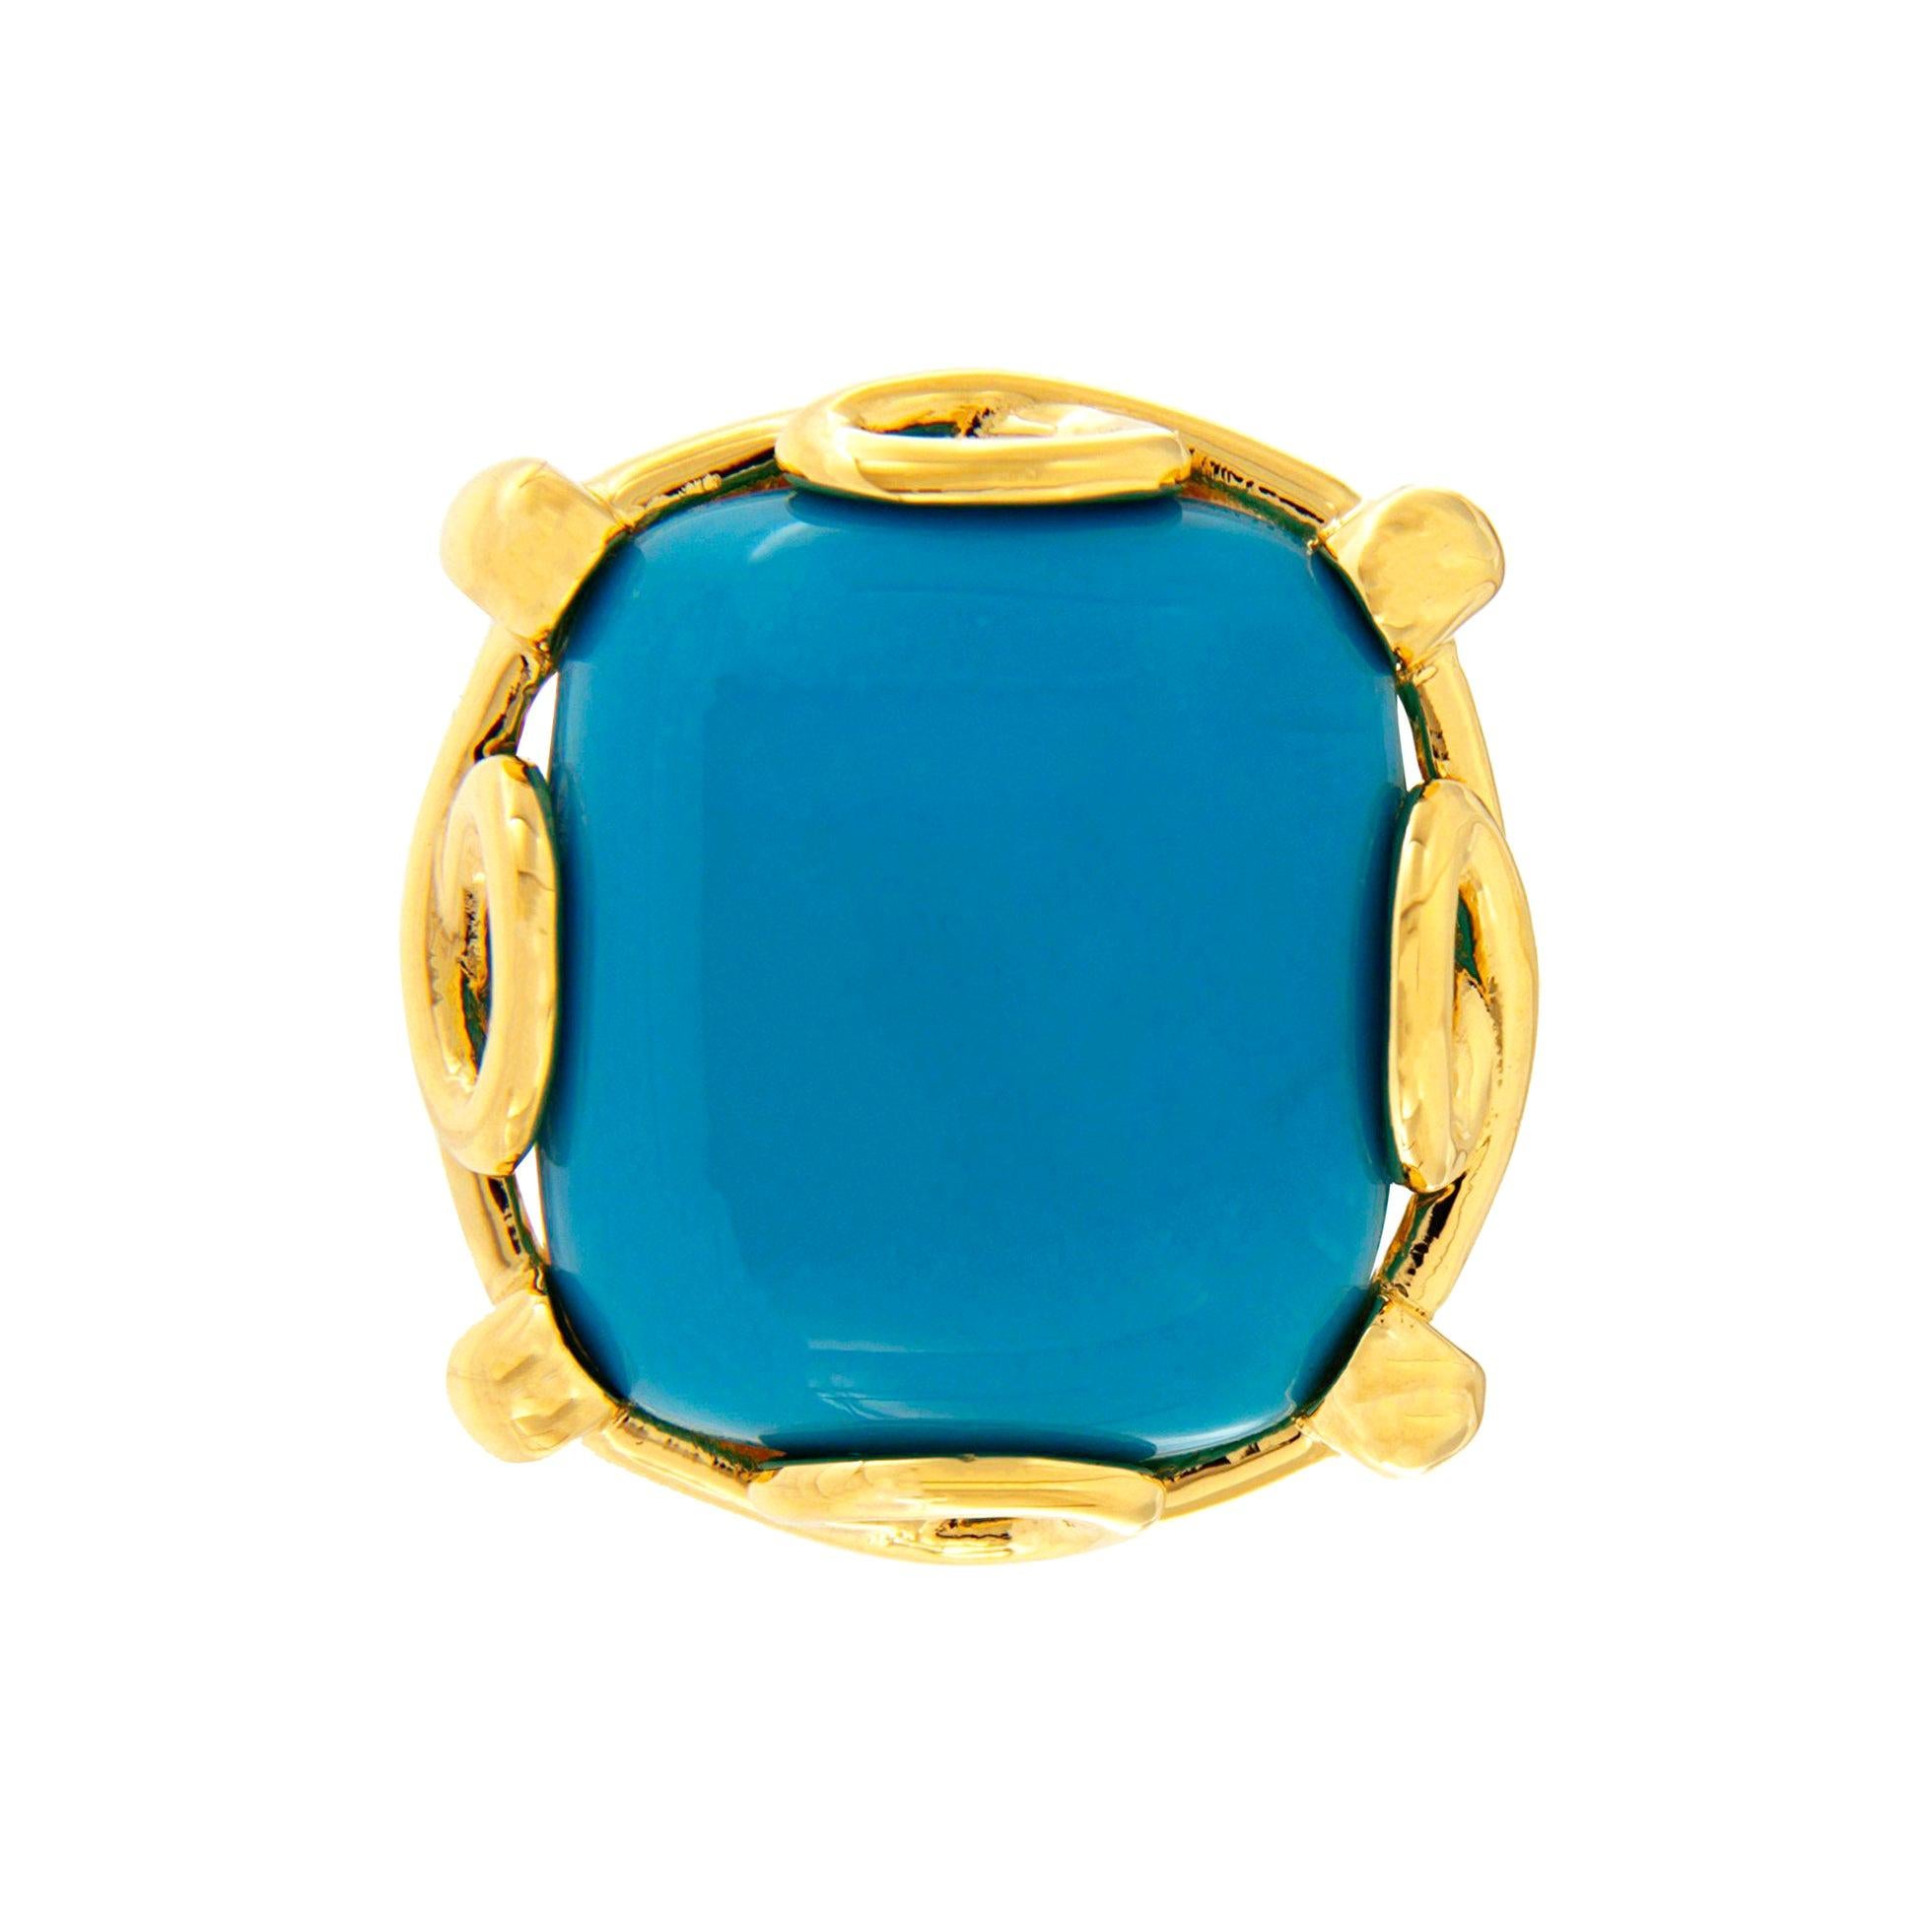 Bague coussin Sleeping Beauty turquoise en or jaune 18 carats Neuf - En vente à New York, NY